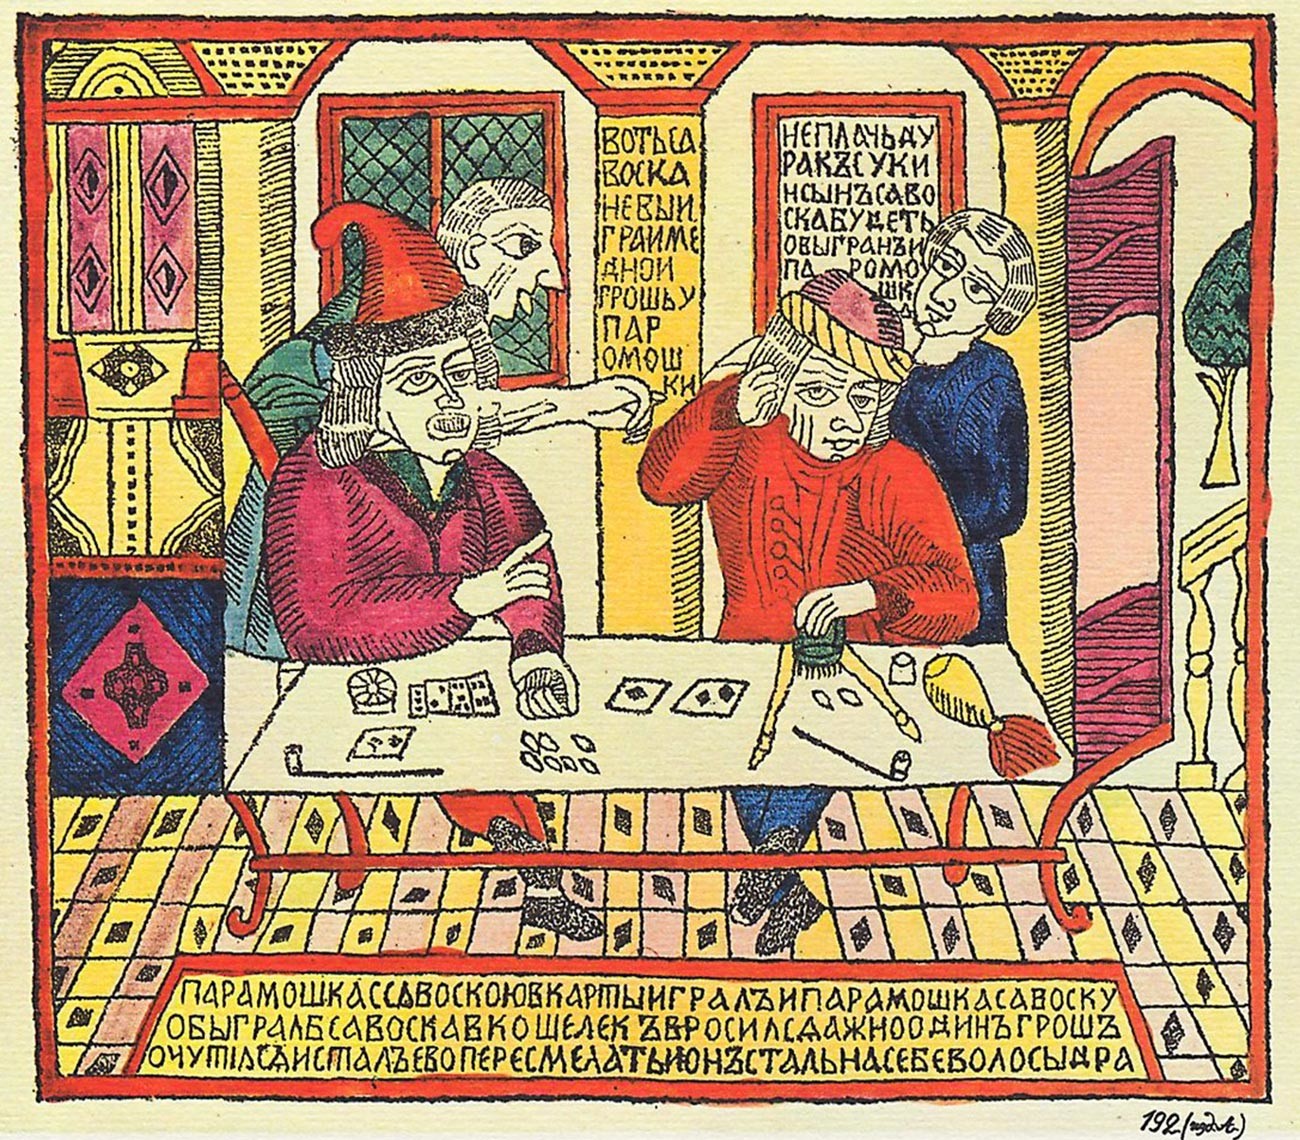 Lubok ‘Savoska and Paramoshka’, 18th century. The caption says: “Paramoshka was playing cards with Savoska and Paramoshka won. Savoska looked into his purse and found a single kopeck there. [Paramoshka] began laughing at him, and he began to tear his hair out.”